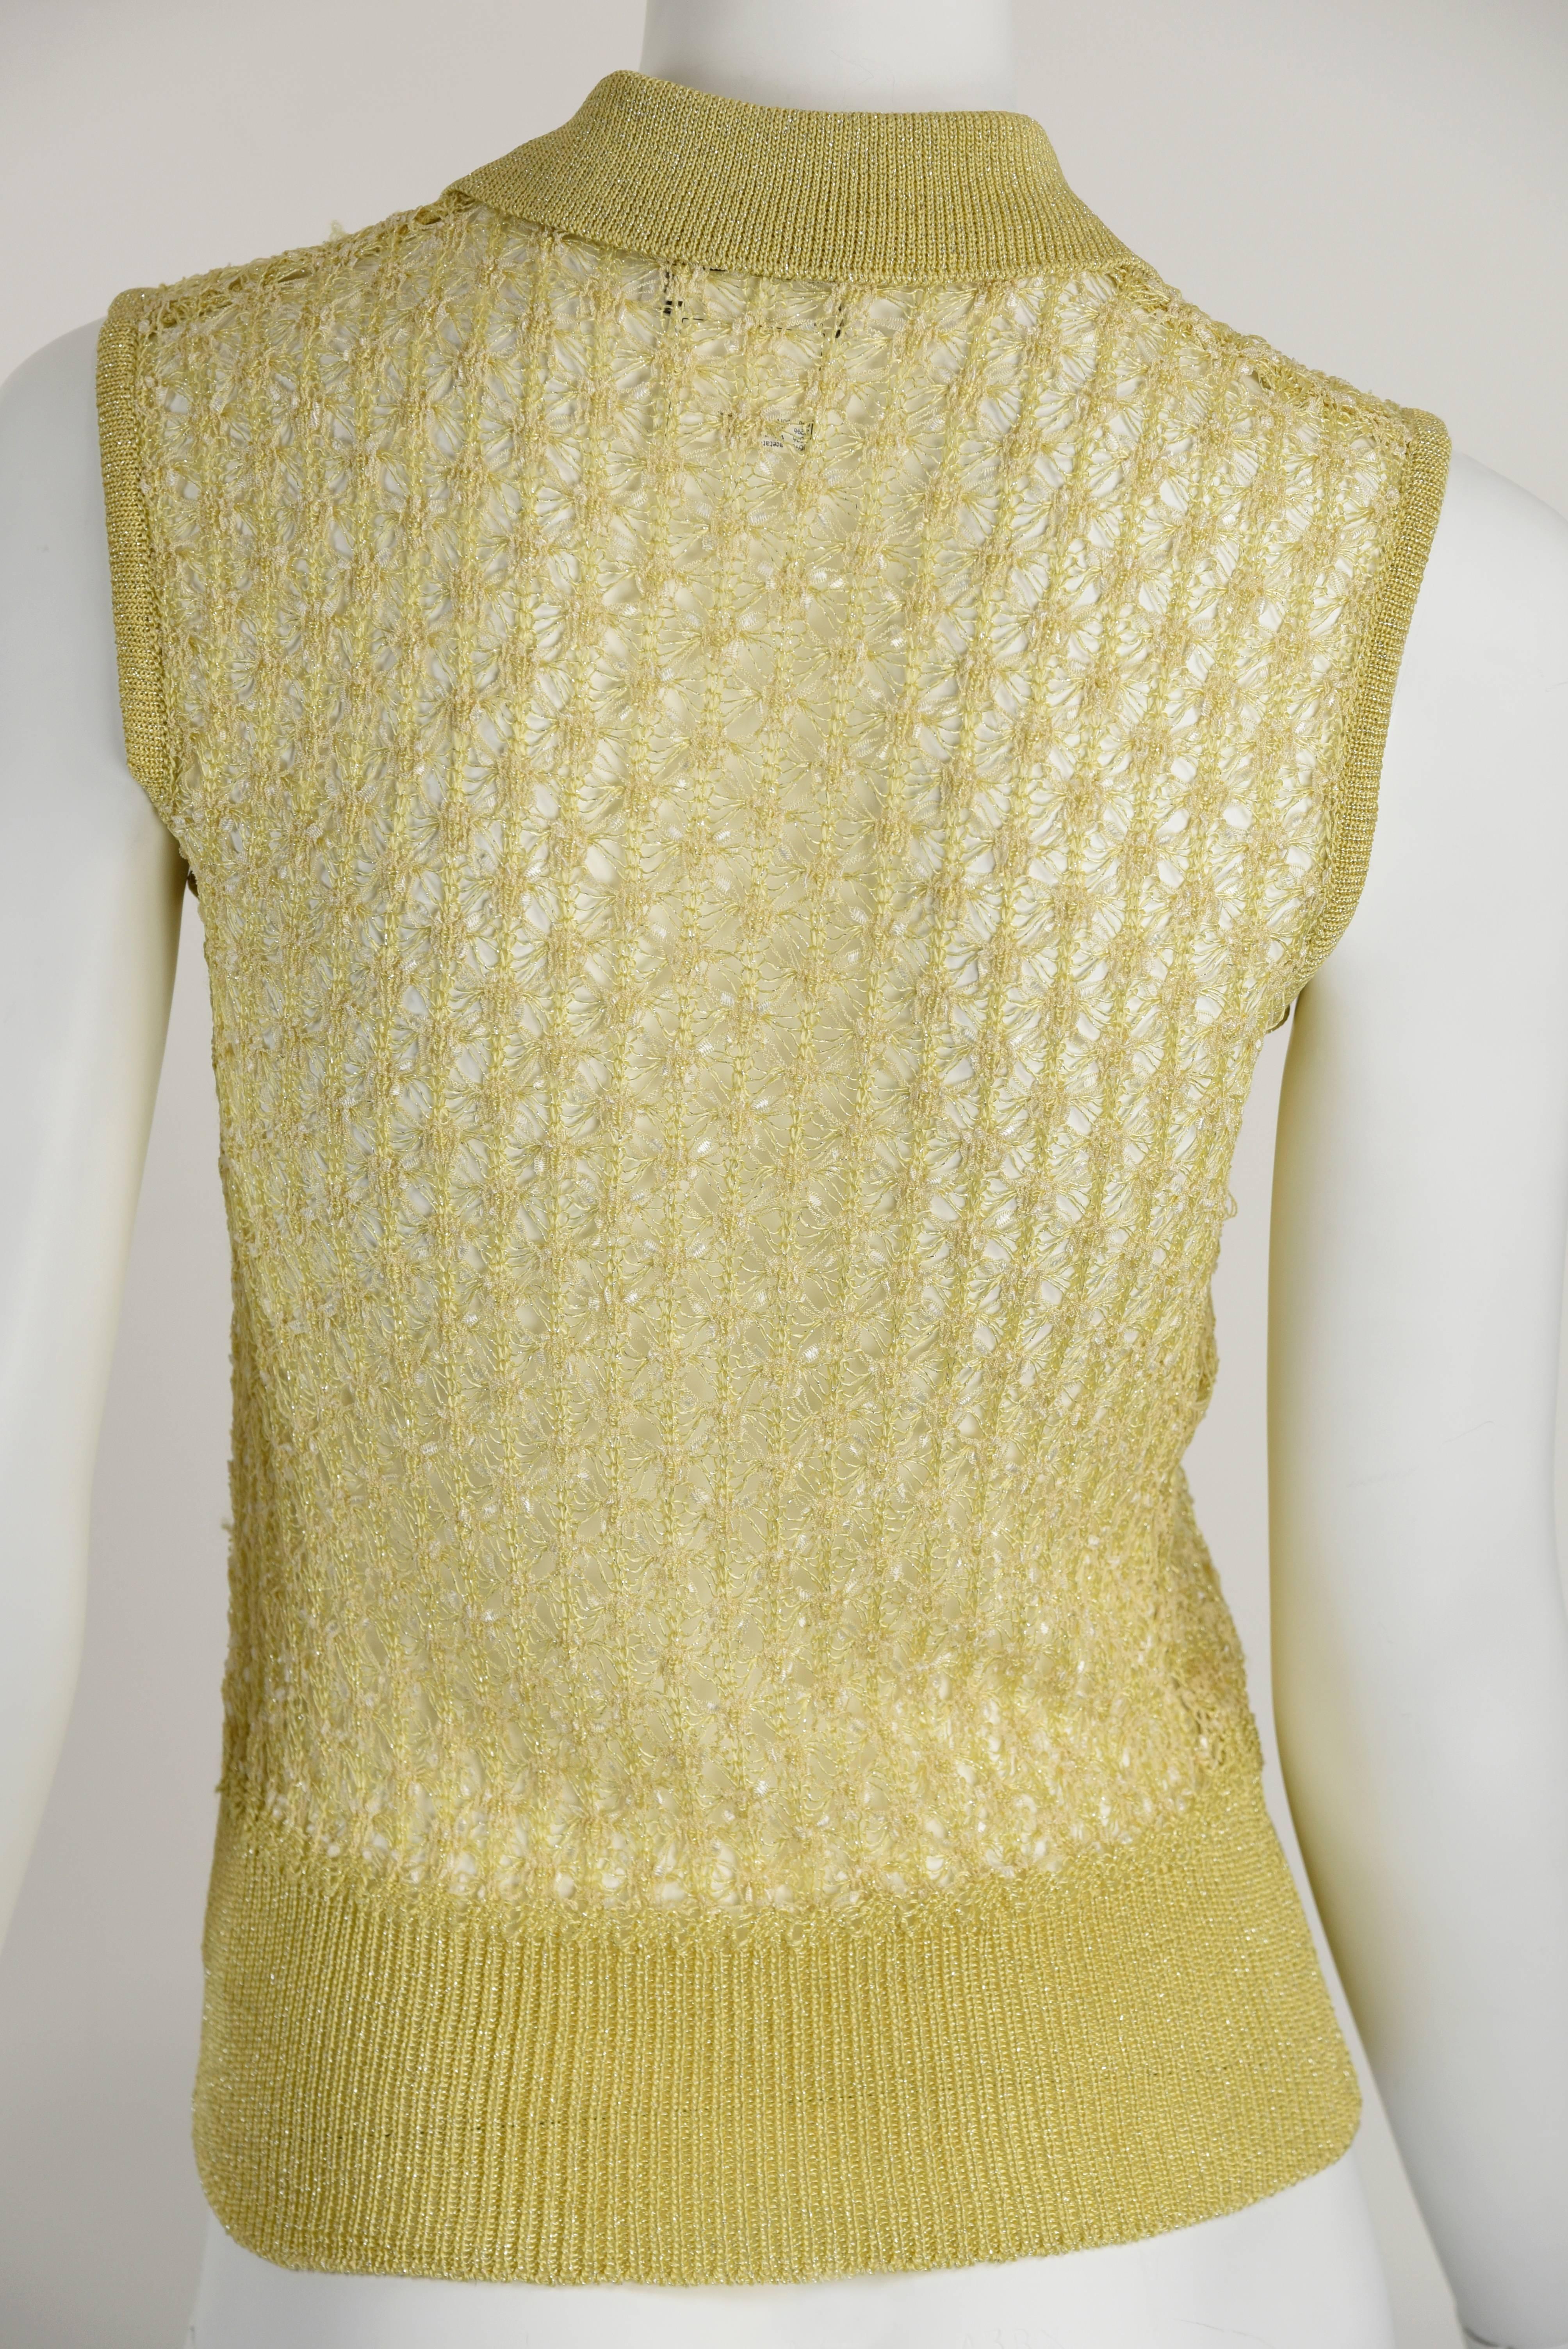 Women's Chanel Boutique 1997P Gold/Metallic Crochet Sleeveless Top with Clear Buttons 42 For Sale